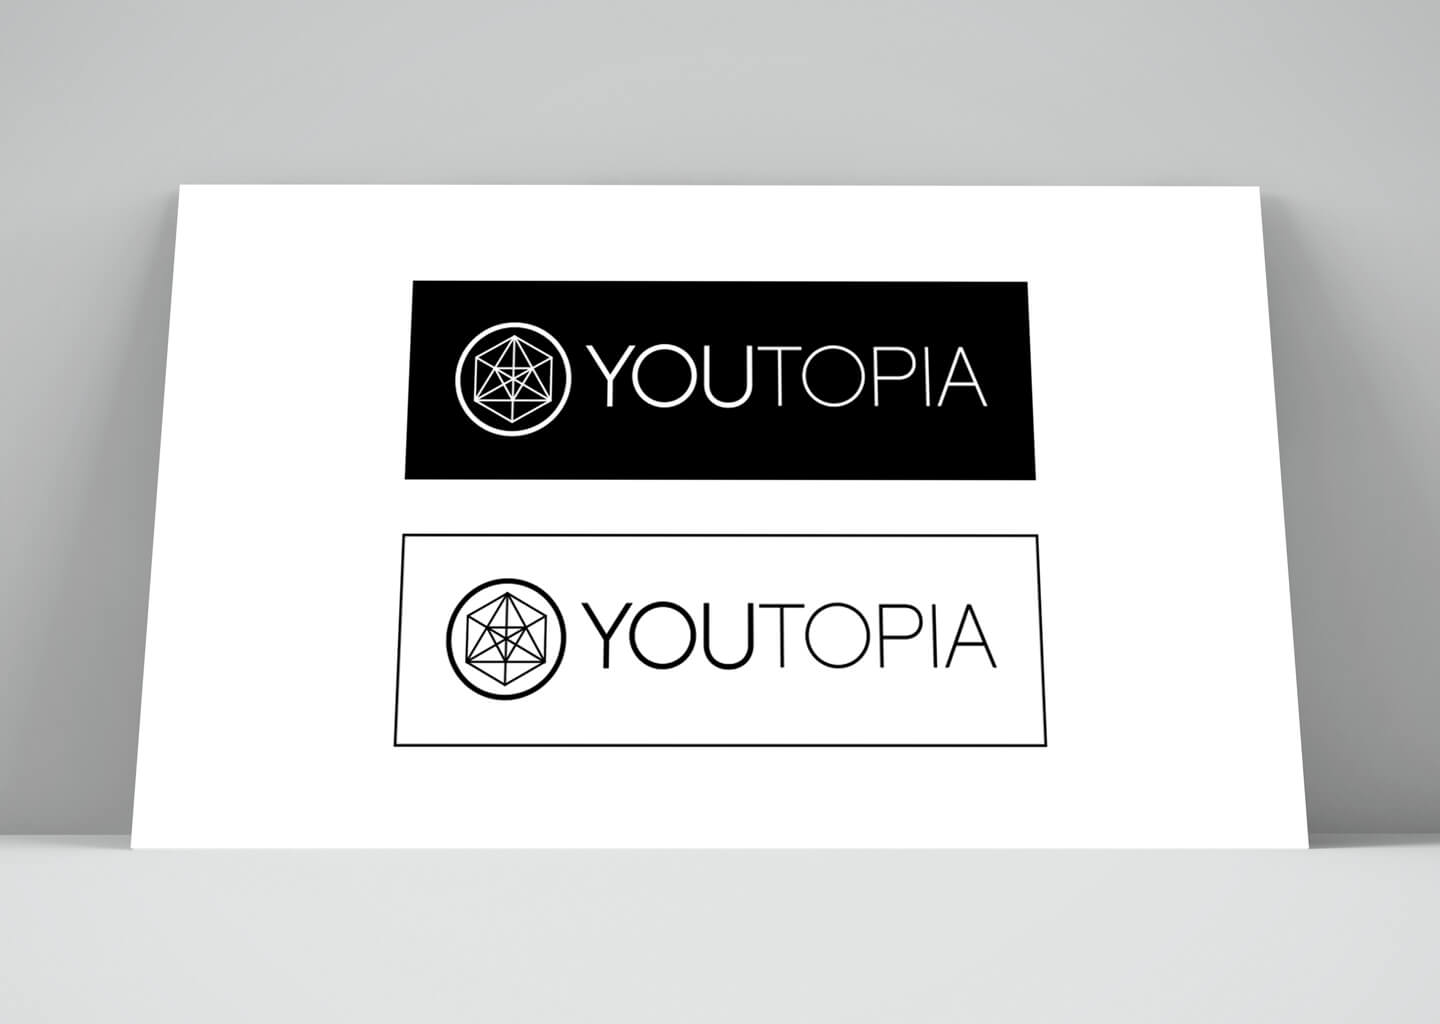 Solid colour logos for Youtopia branding